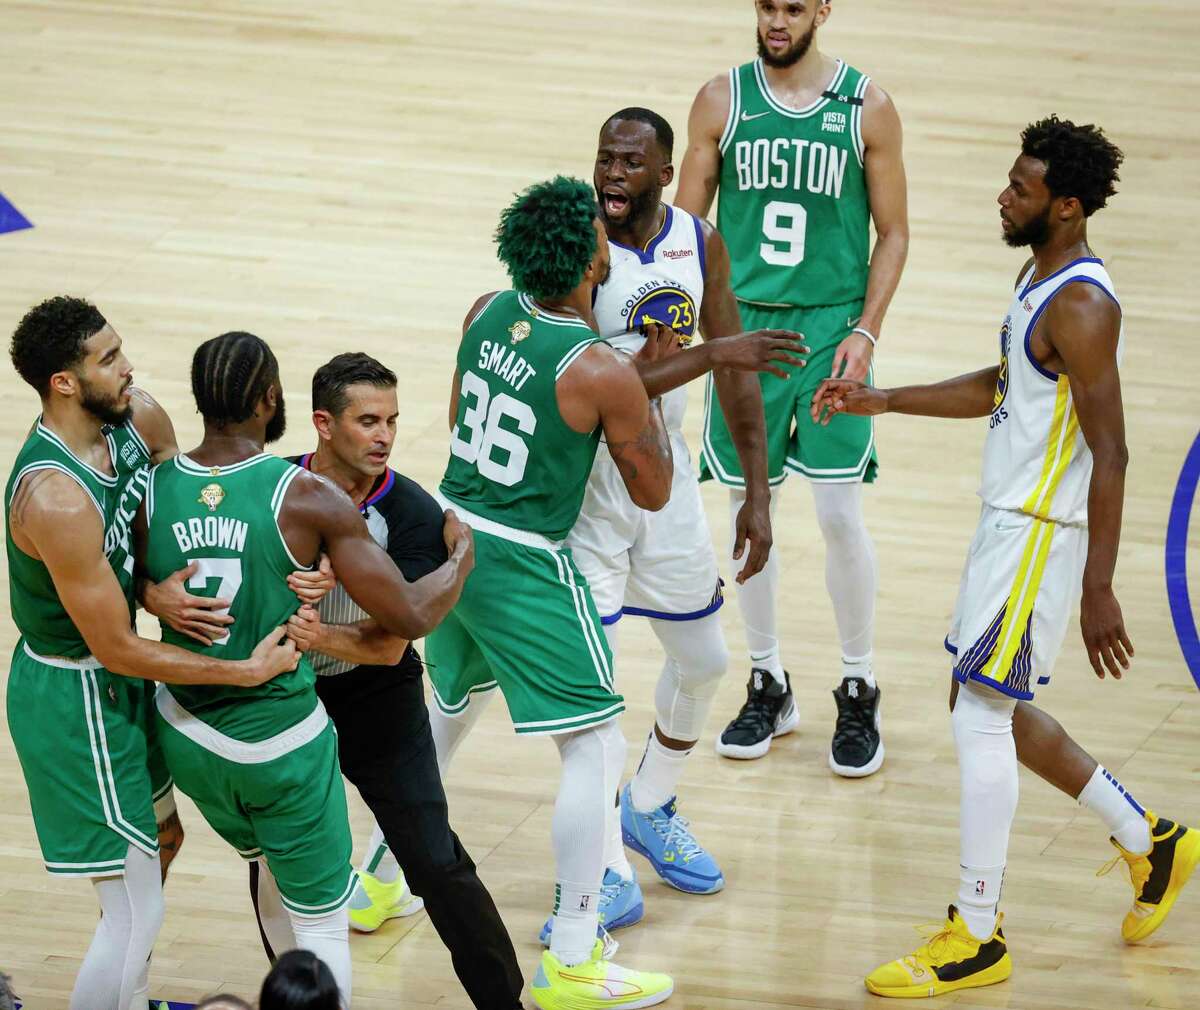 Golden State Warriors' Draymond Green, 23, shares words with Boston Celtics' Jaylen Brown, 7, during the second quarter of the NBA Finals at Chase Center in San Francisco, Calif., on Sunday, June 5, 2022.